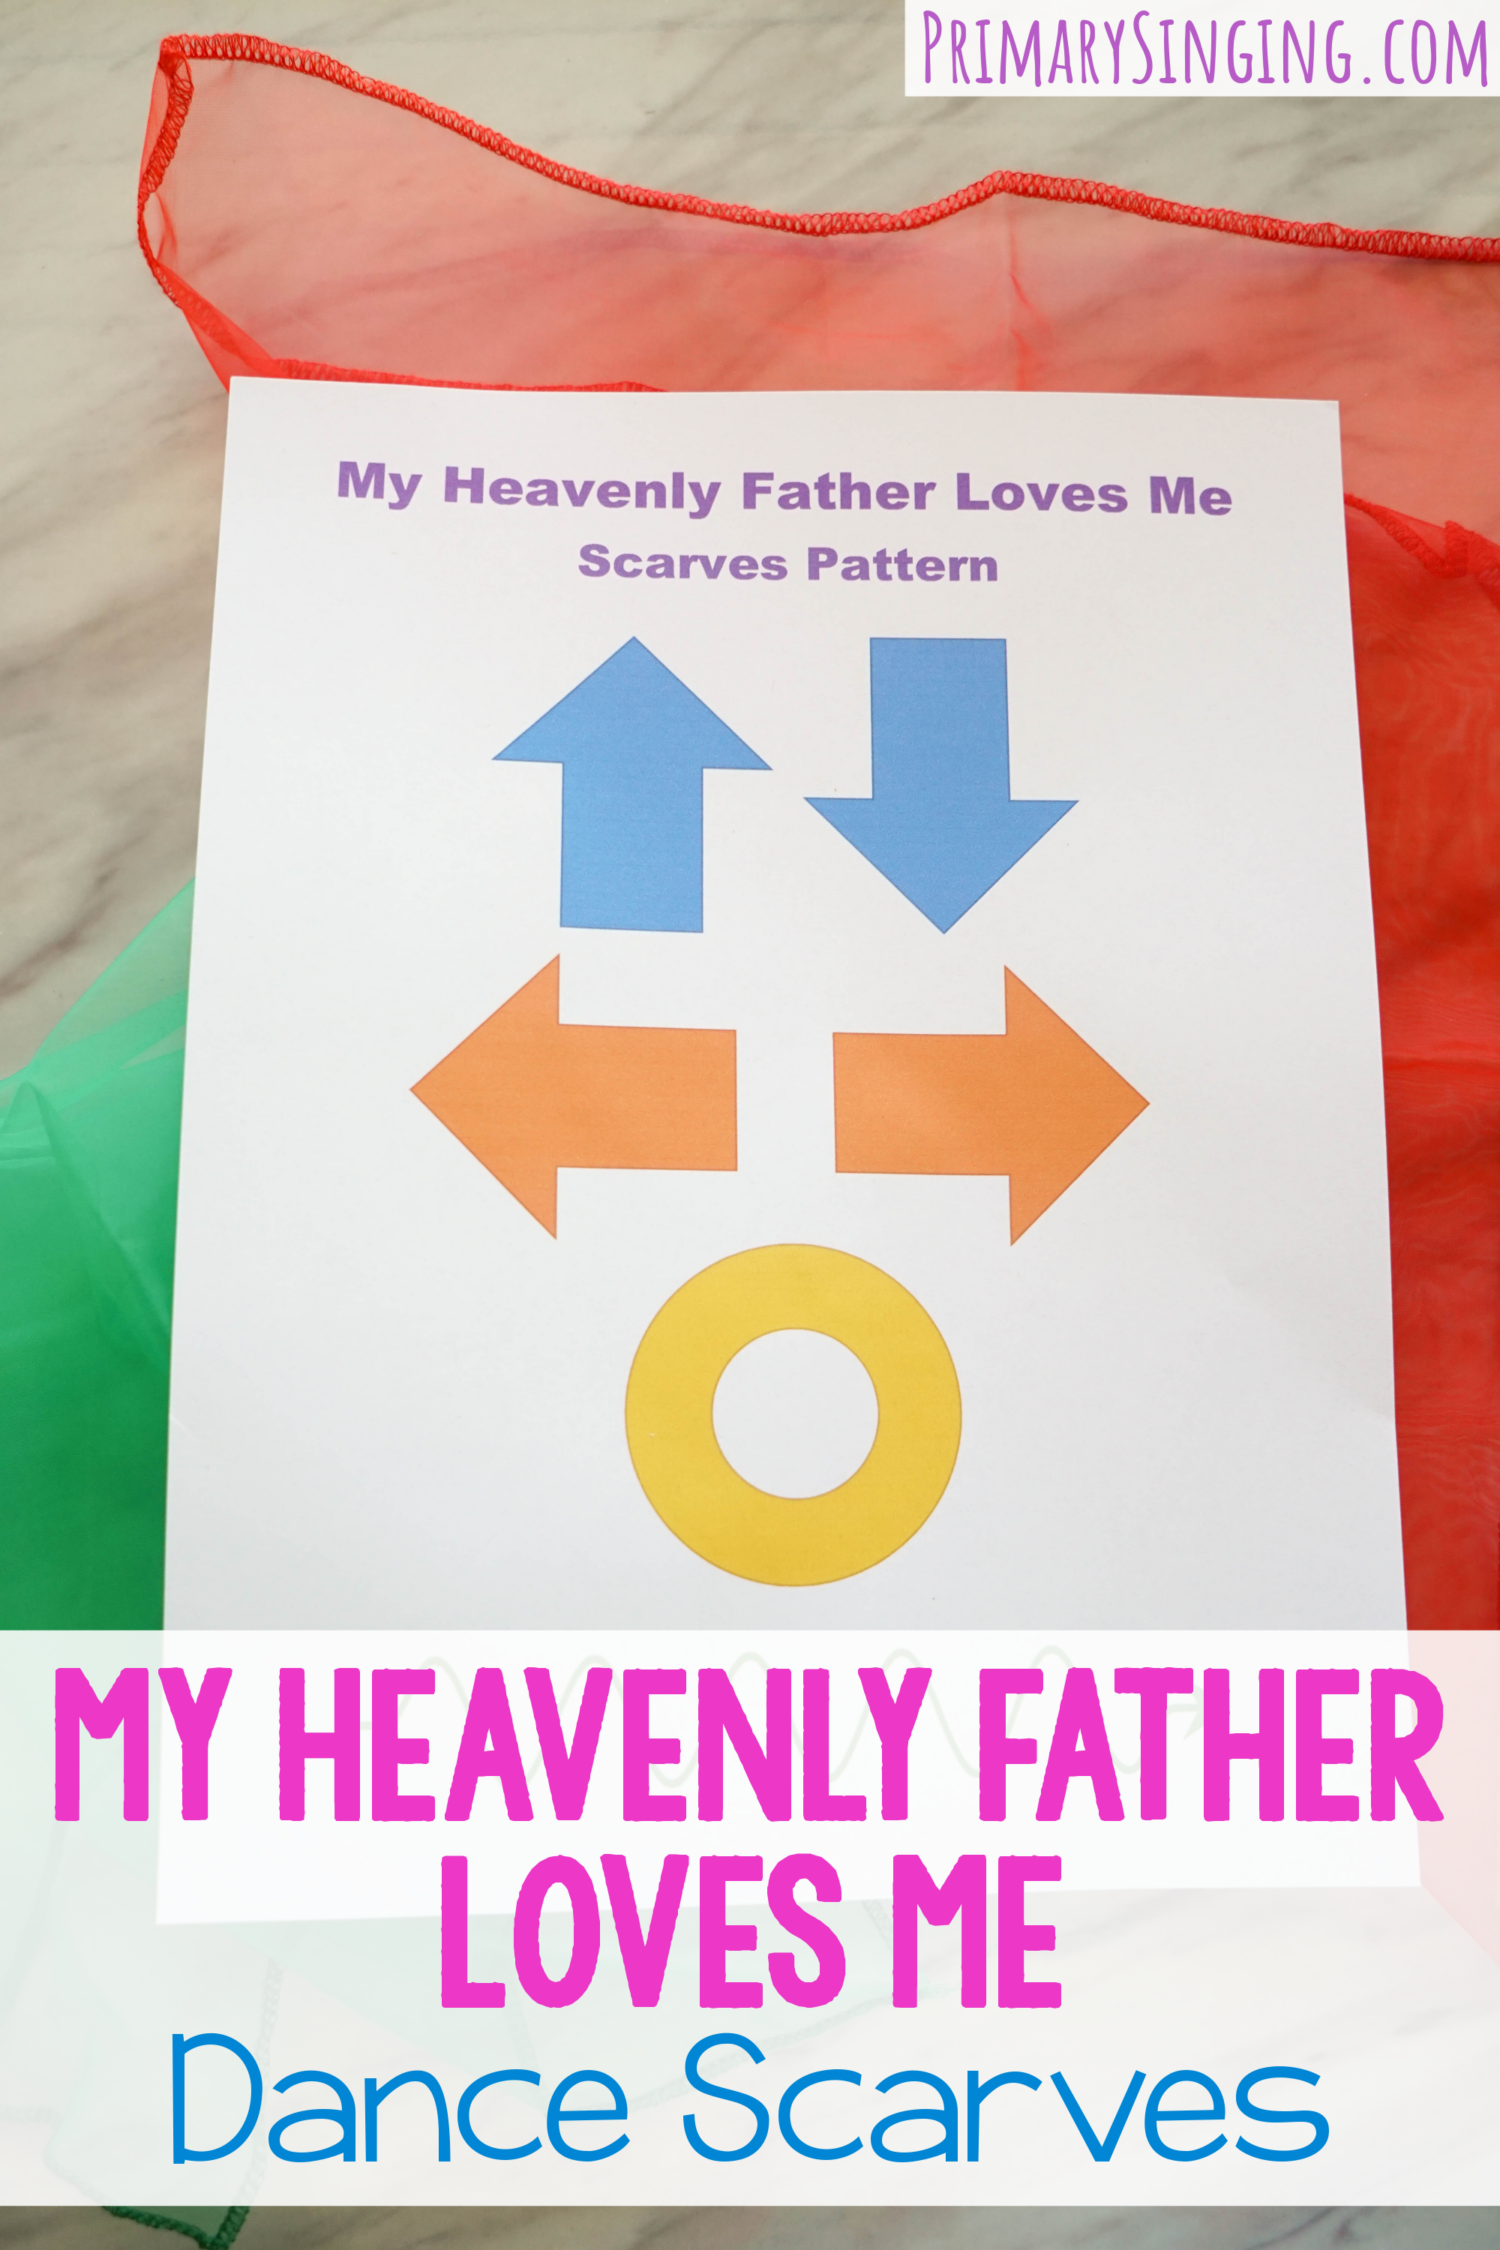 My Heavenly Father Loves Me Dance Scarves Singing Time Ideas and Lesson plan! For Primary music leaders / choristers including printable song helps.